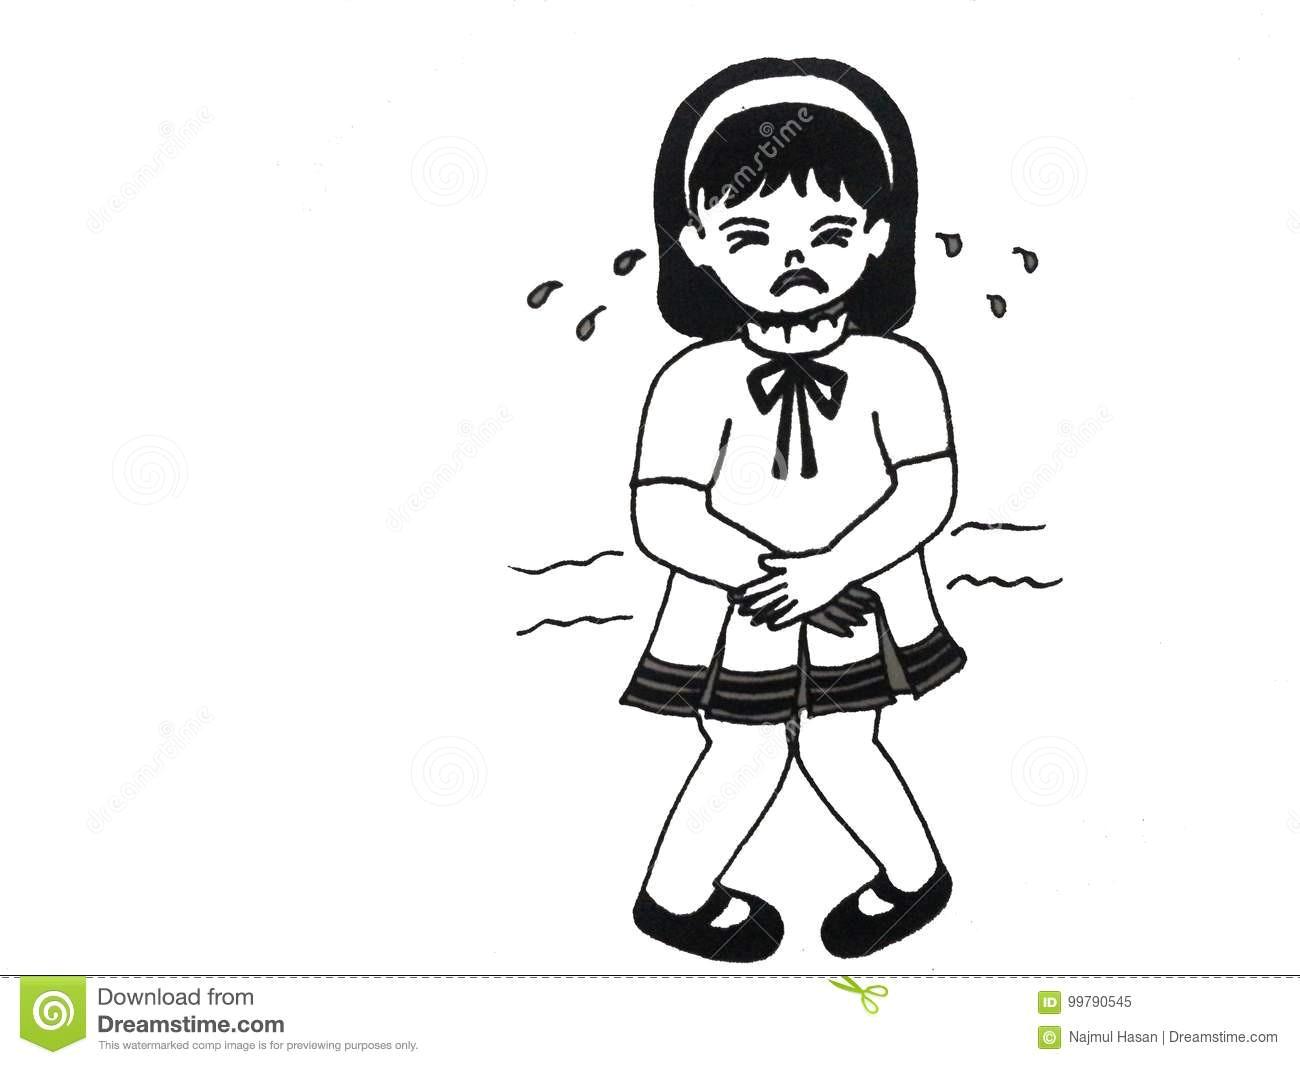 Drawing Of A Little Girl Crying Illustration Of A Crying Girl Stock Illustration Illustration Of